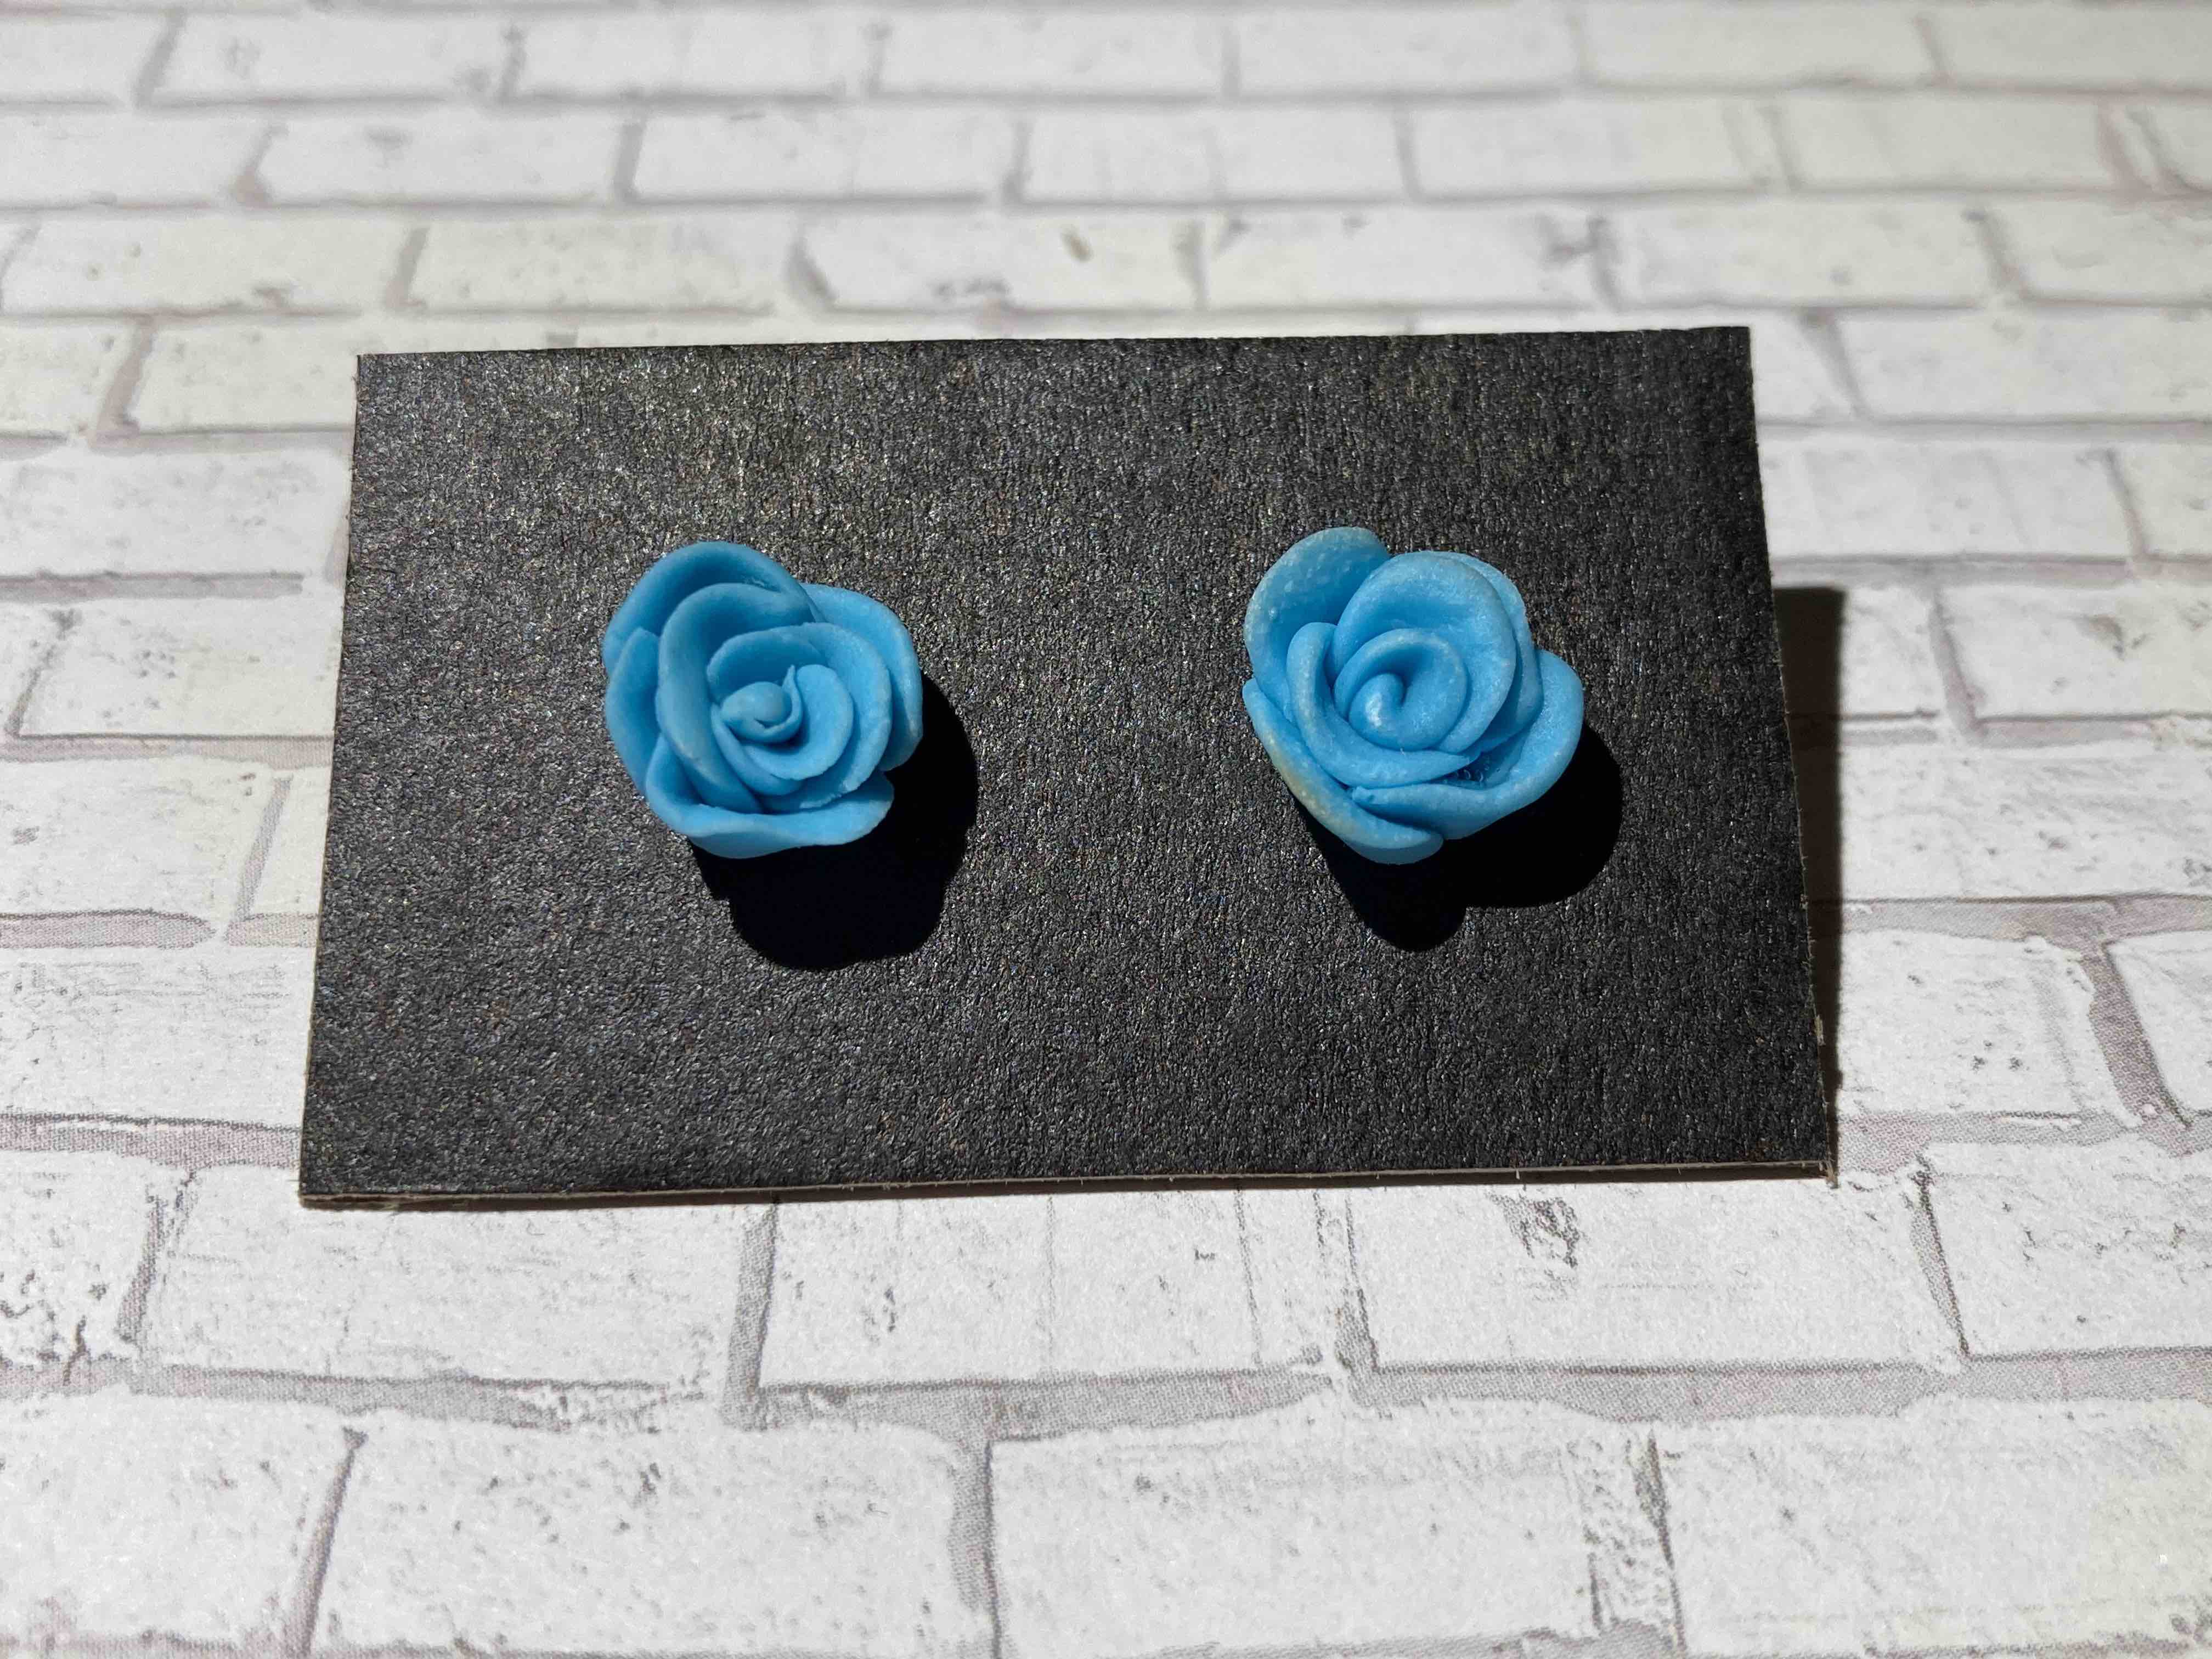 Lovey Baby Blue Roses | Light Blue polymer rose studs with gold posts. Nickel free brass. (Yay diabetes awareness!)